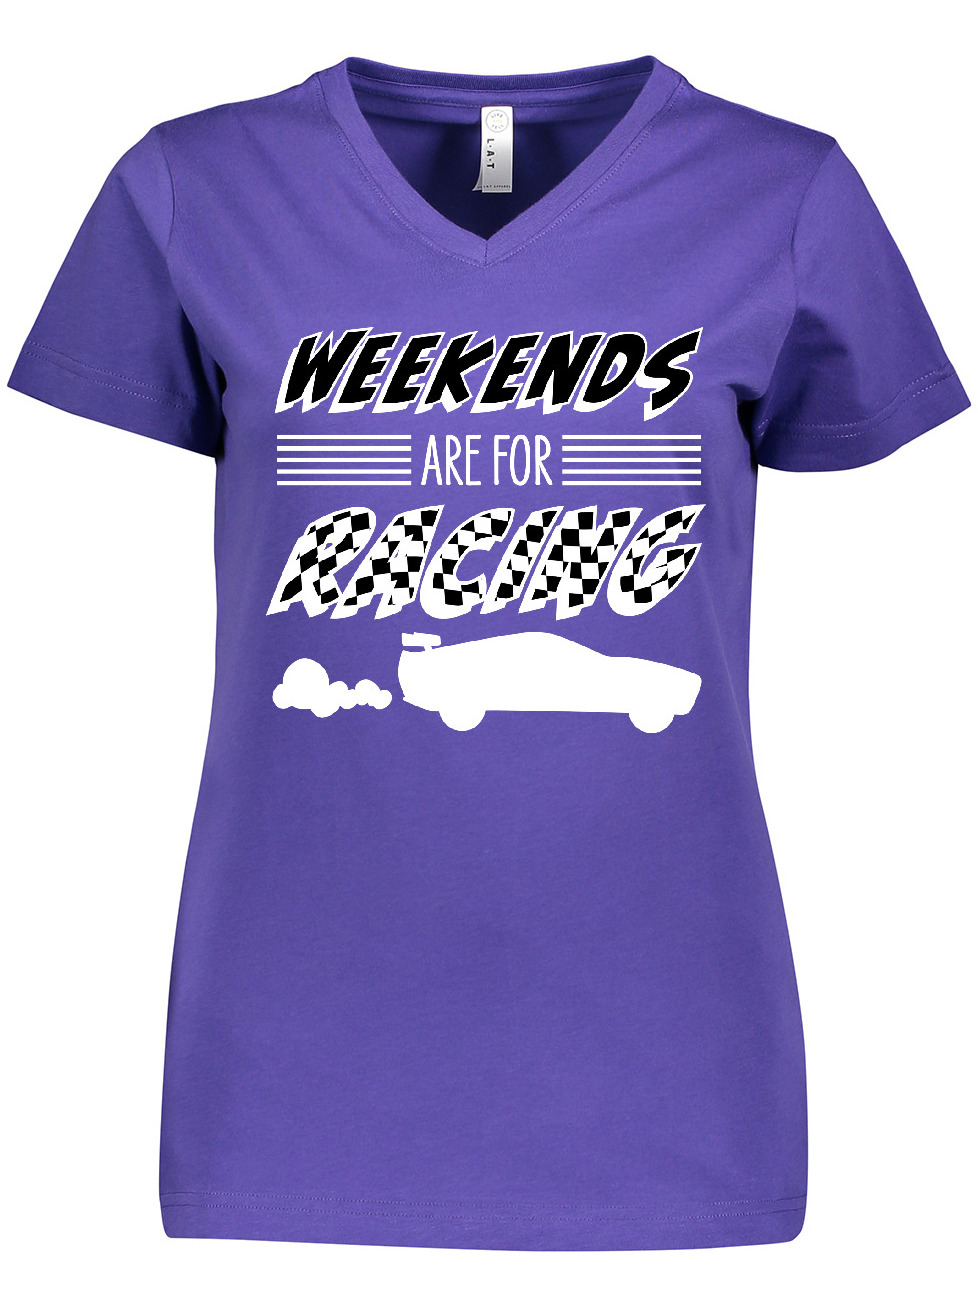 Inktastic Weekends Are for Racing Race Car Silhouette and Racing Flag Women's V-Neck T-Shirt - image 1 of 4